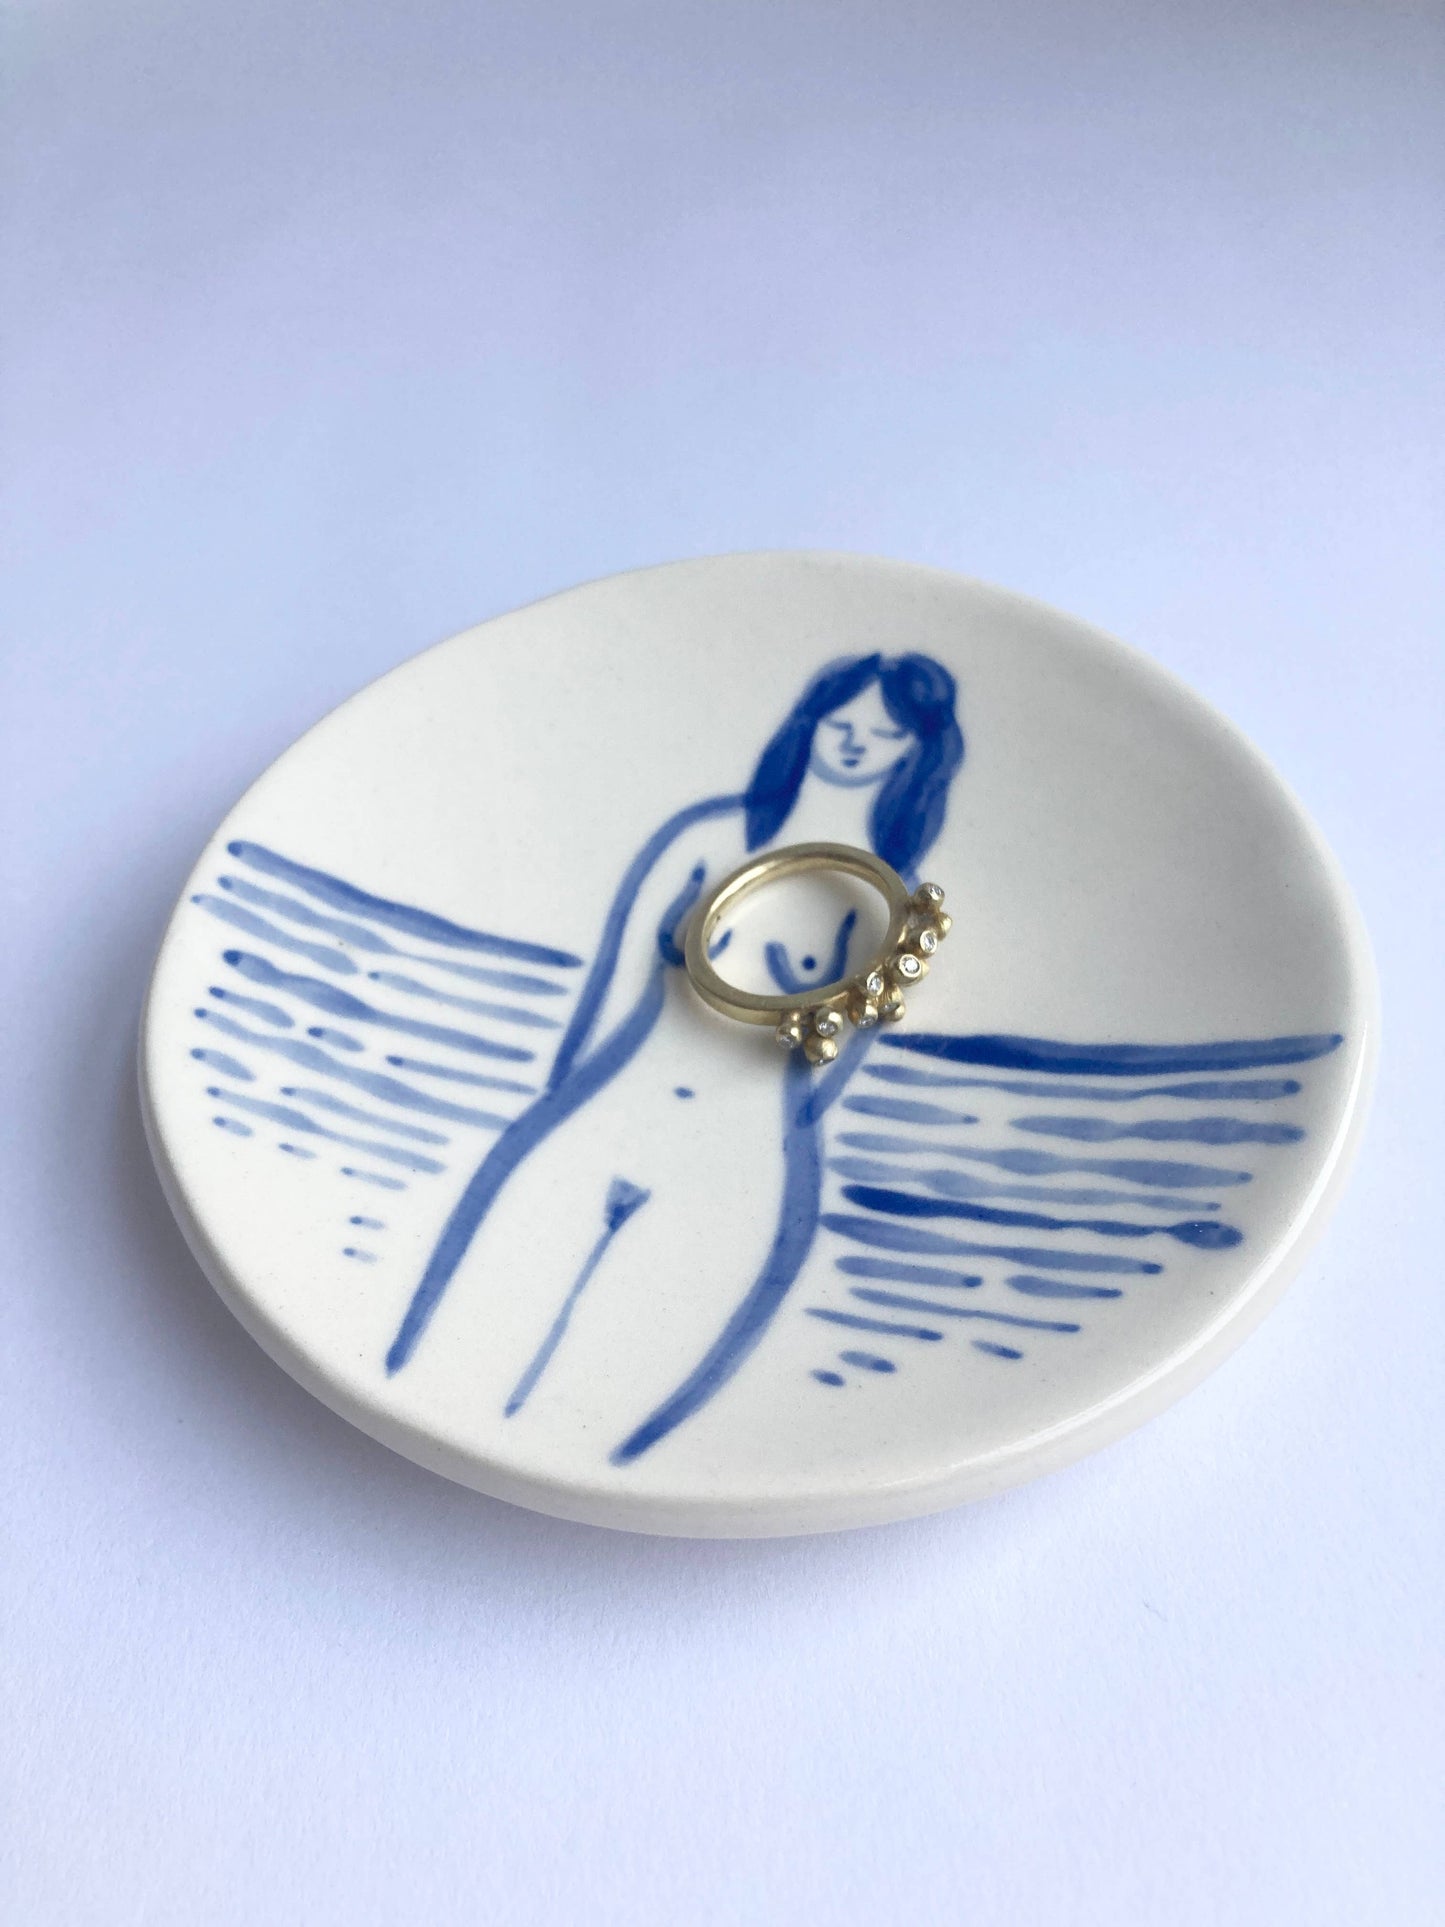 Matisse ring dish / little plate / trinket tray